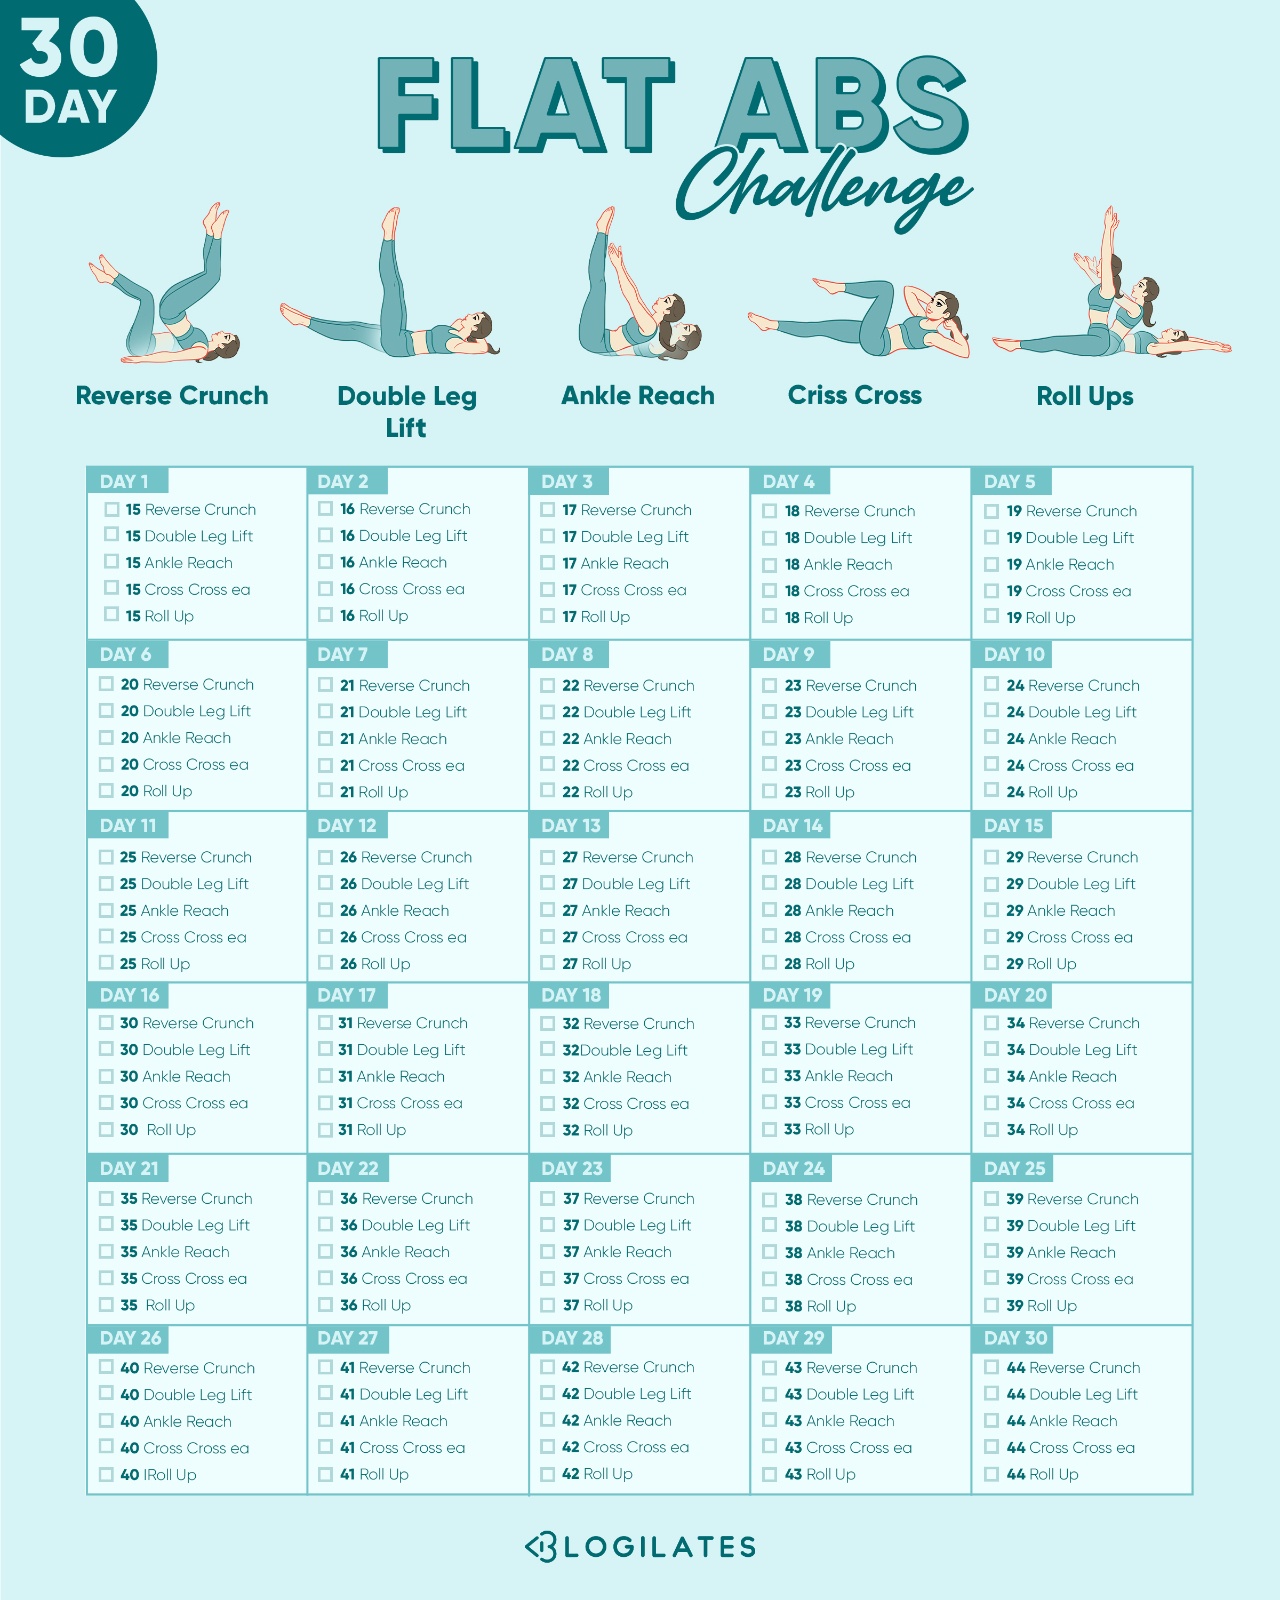 30 Day Flat Abs Challenge! Blogilates